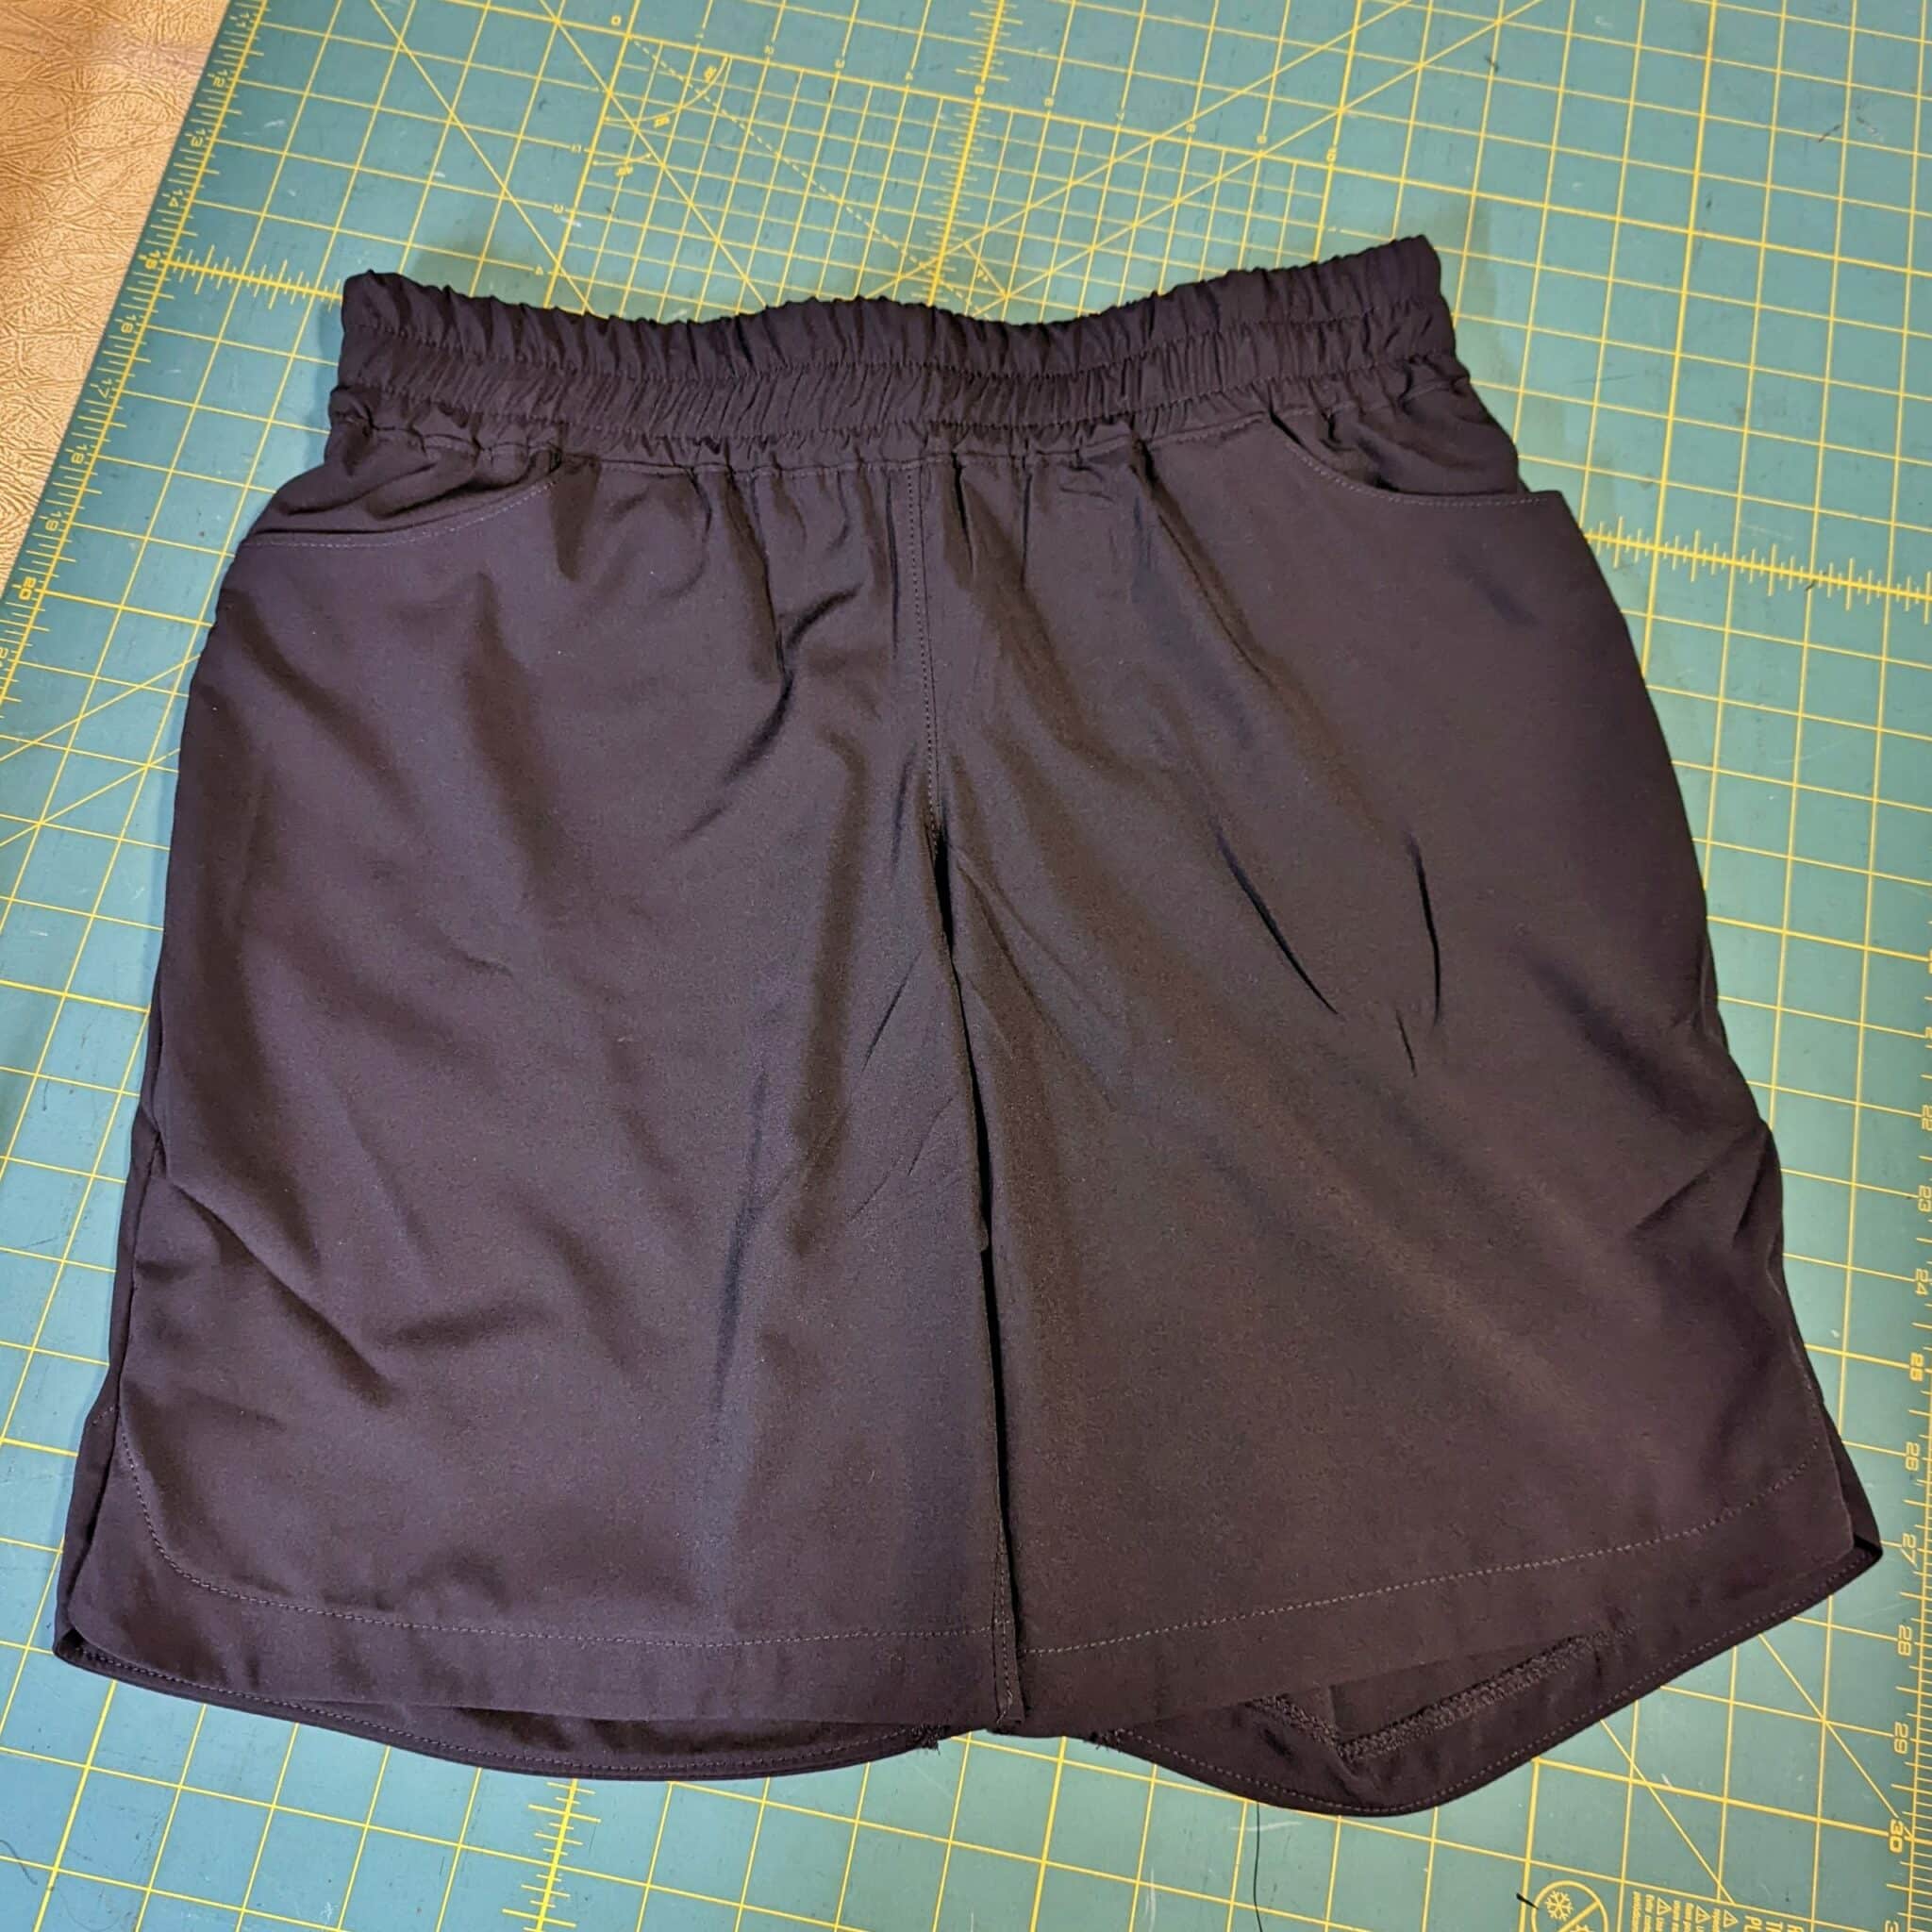 Curved Hem Hack for the Malia Shorts - 5 out of 4 Patterns